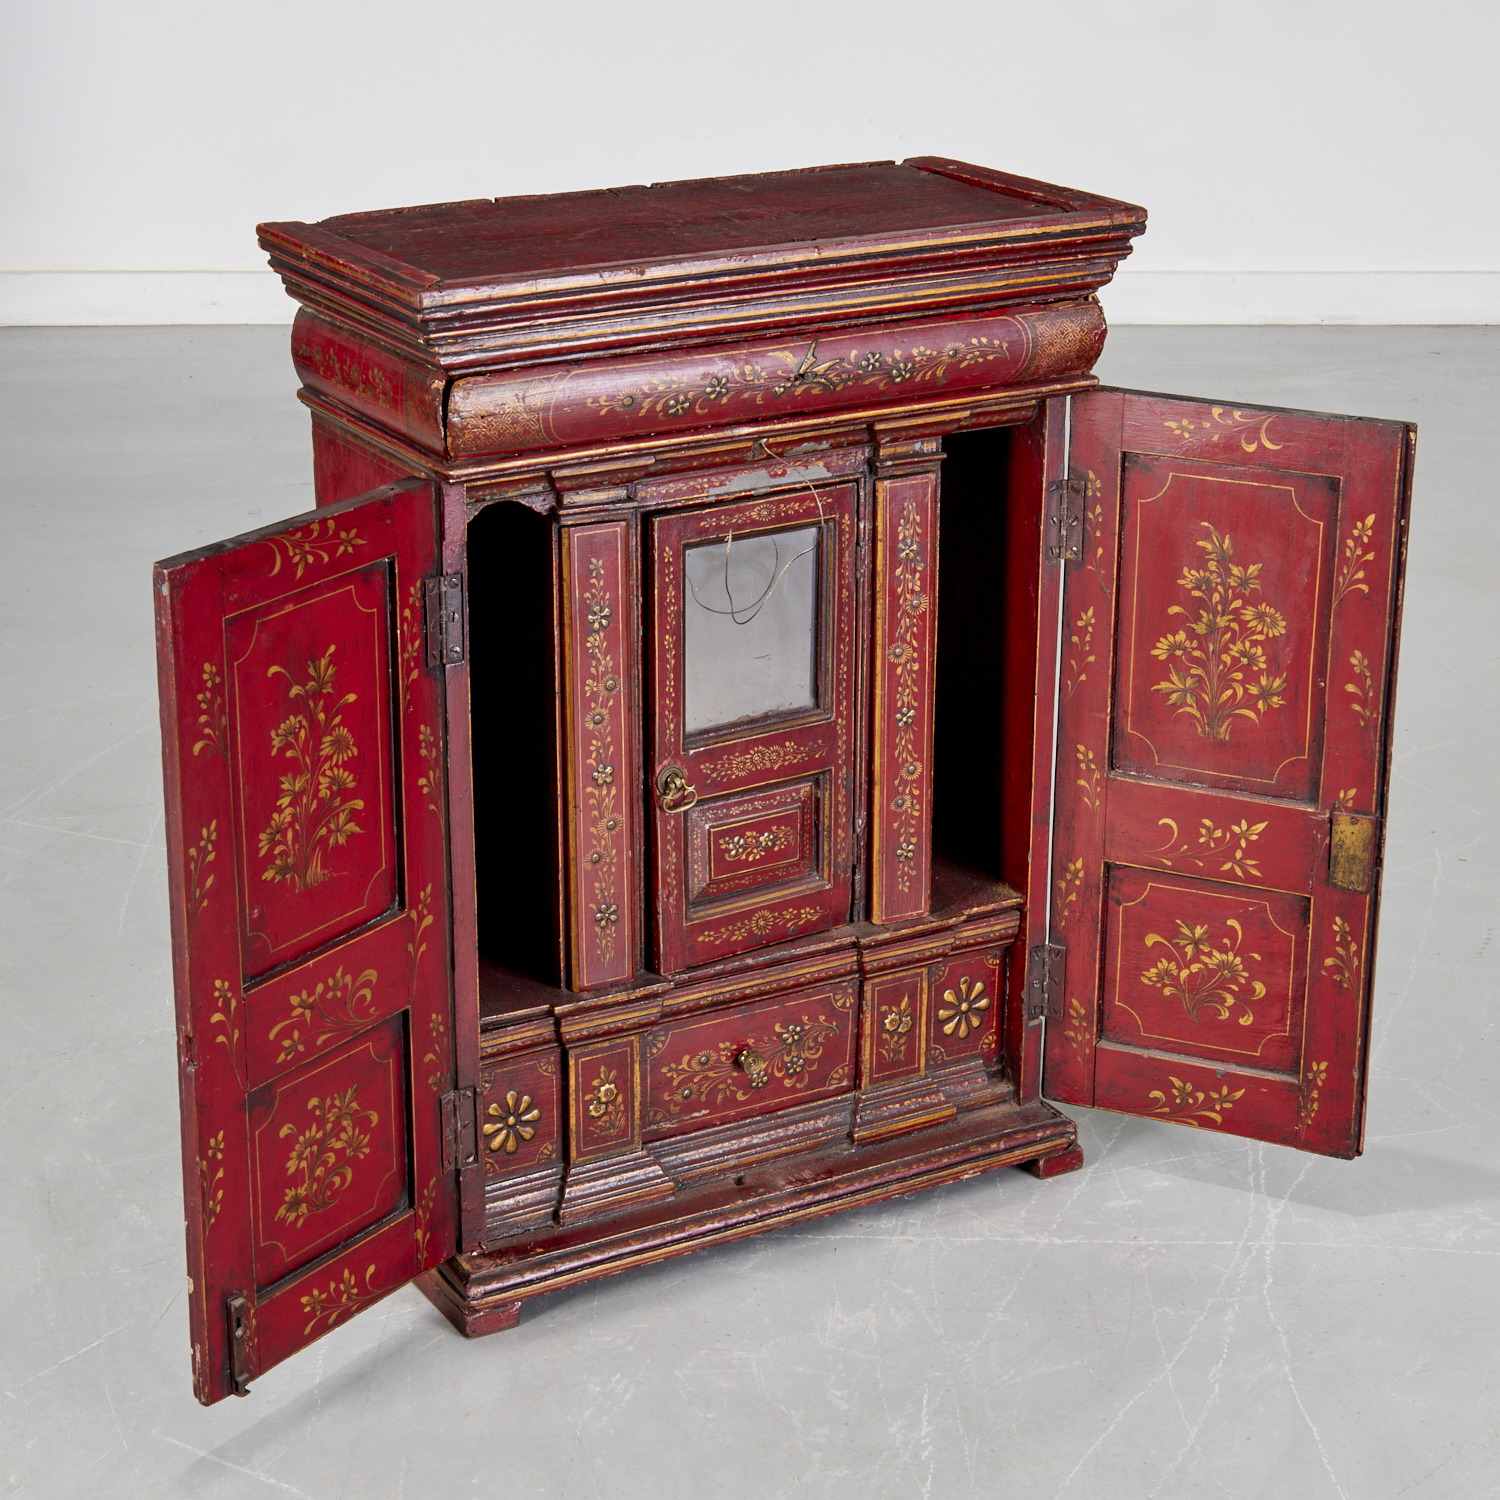 GEORGE III RED JAPANNED CABINET